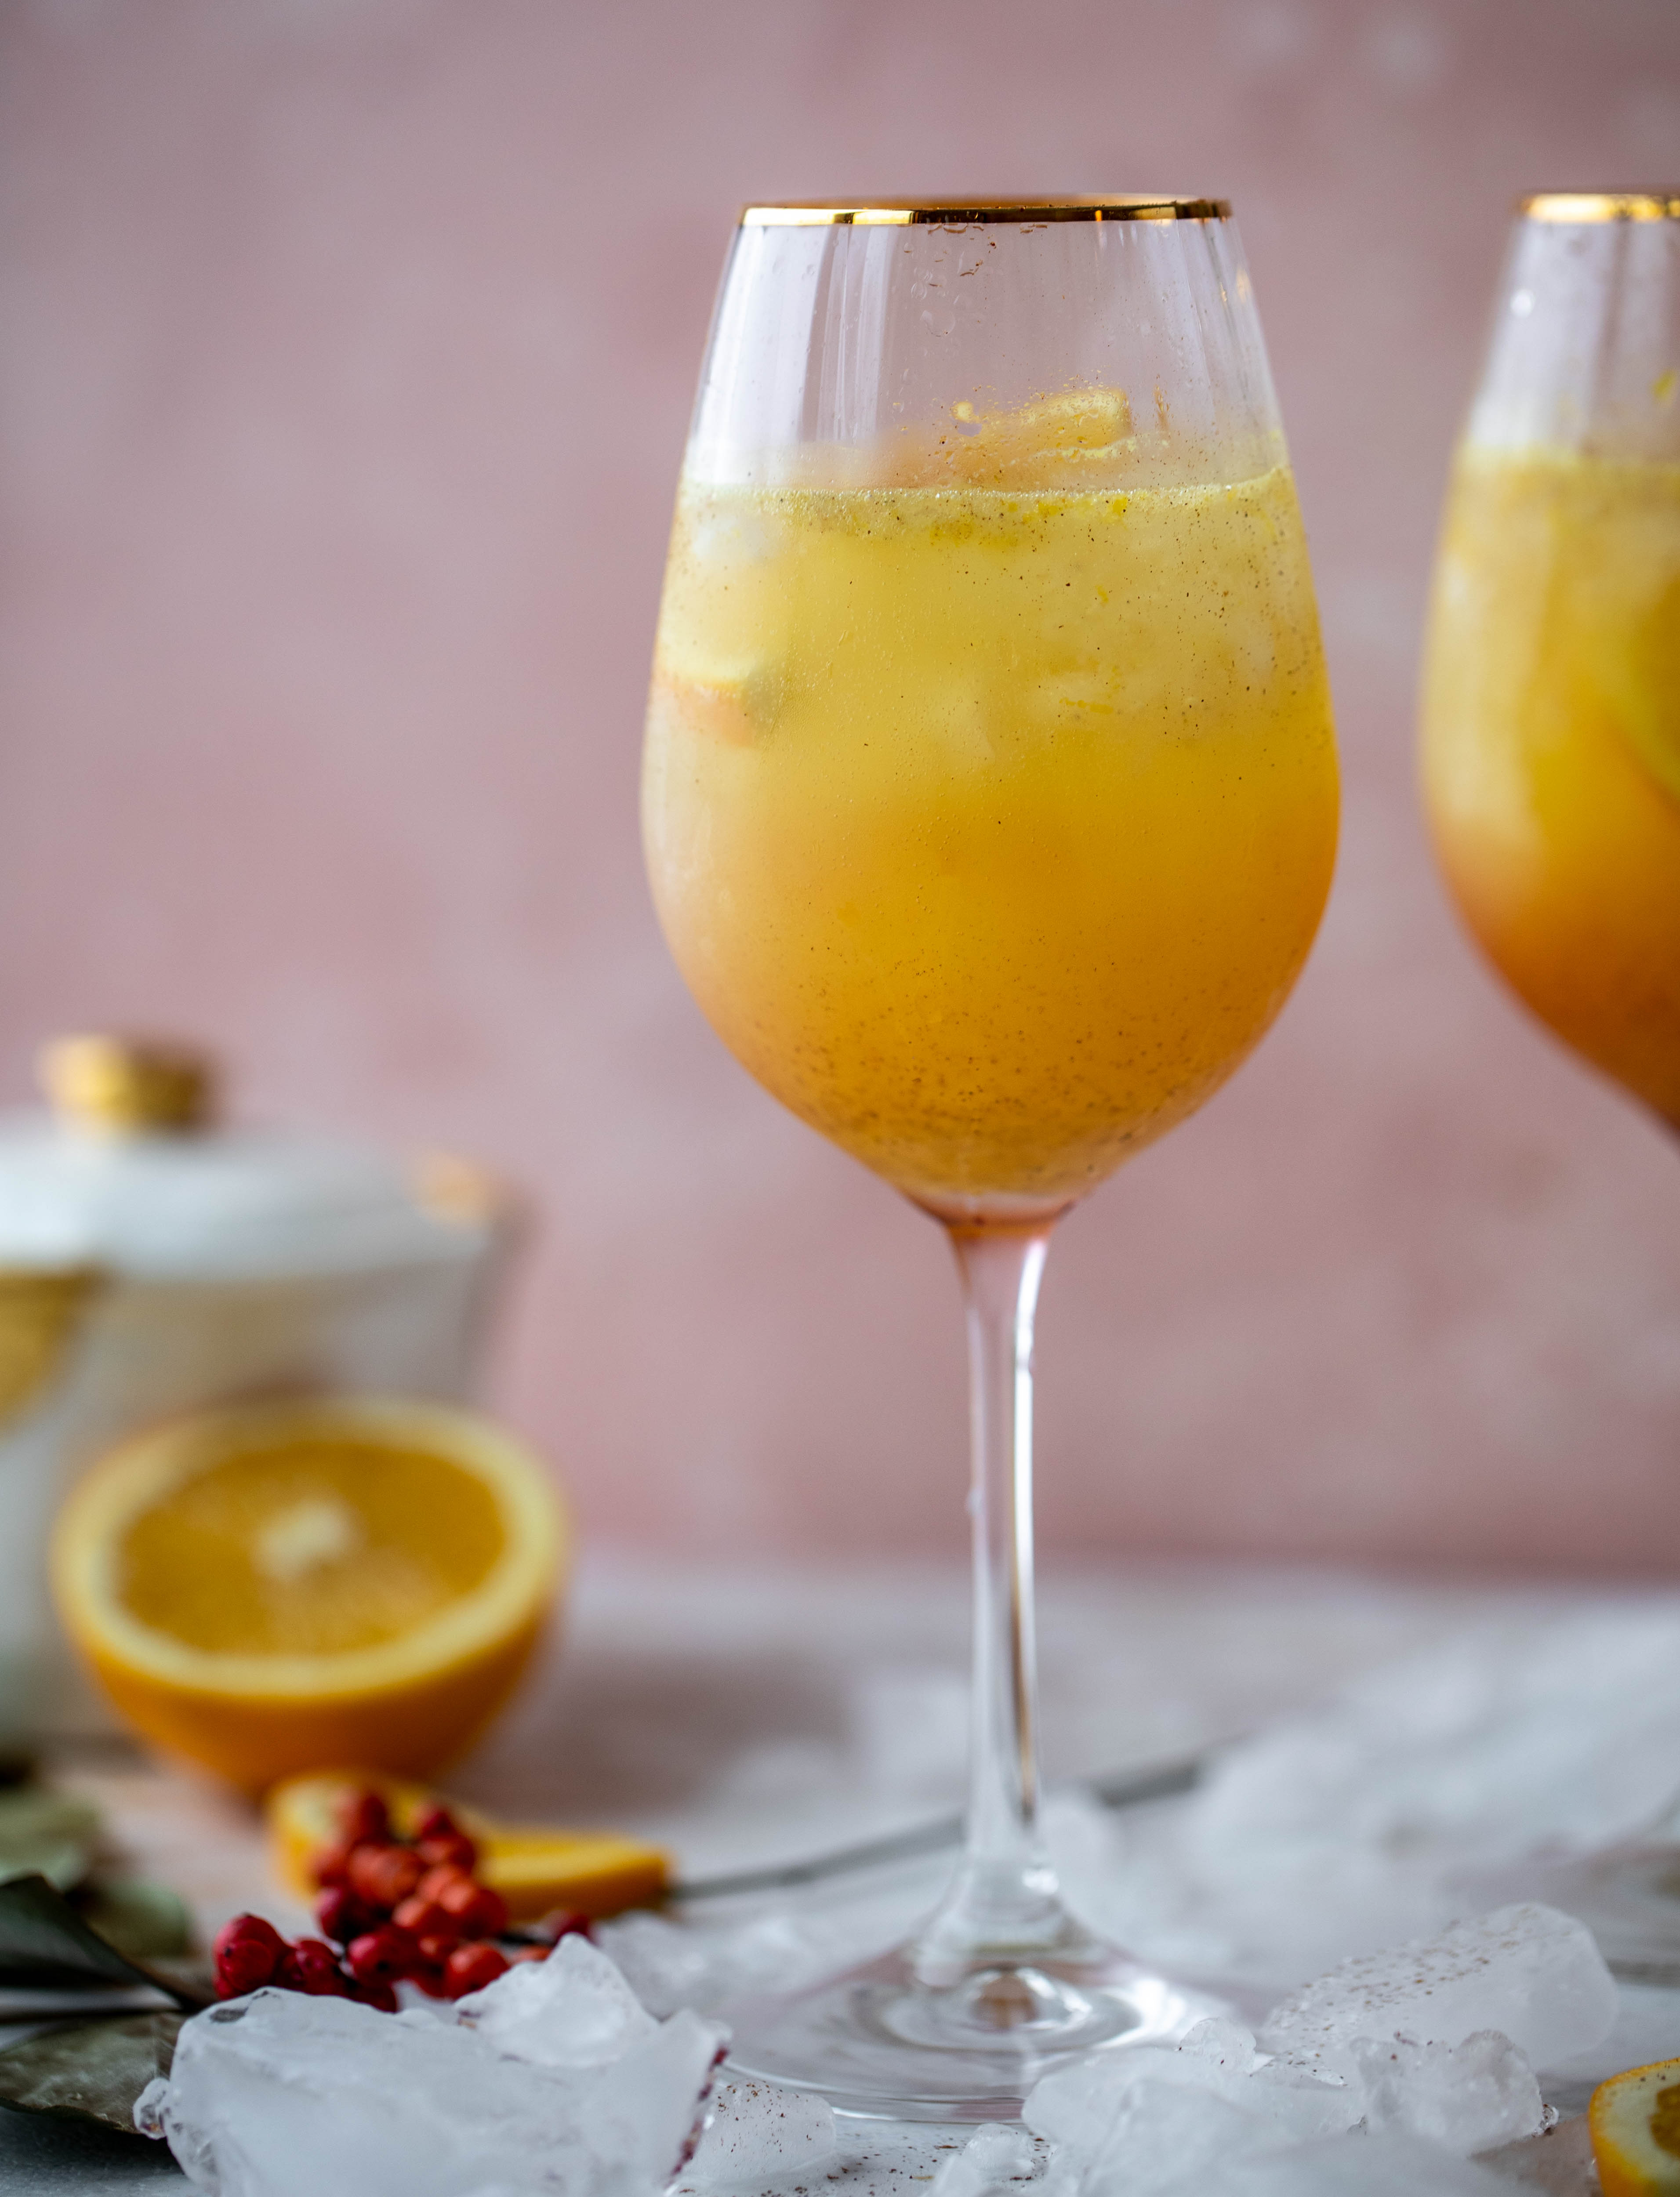 The spiced orange spritzer is a fancier mimosa and similar to an aperol spritz! A fresh spiced orange juice based mixed with prosecco and seltzer. So good!